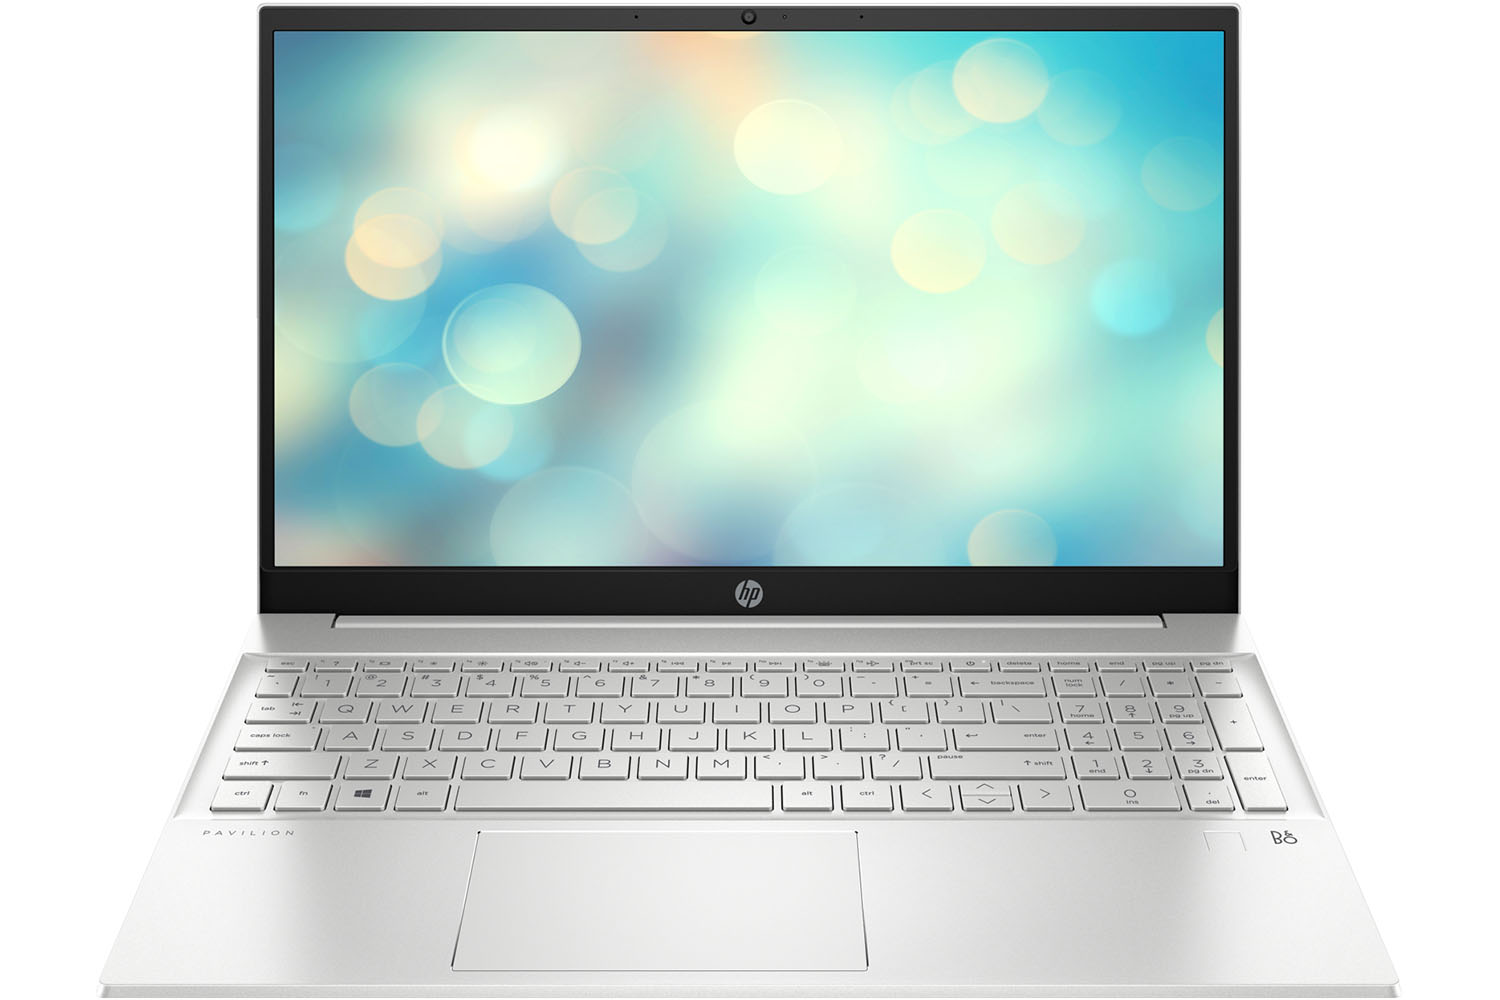 The HP Pavilion 15-inch laptop on a white background.